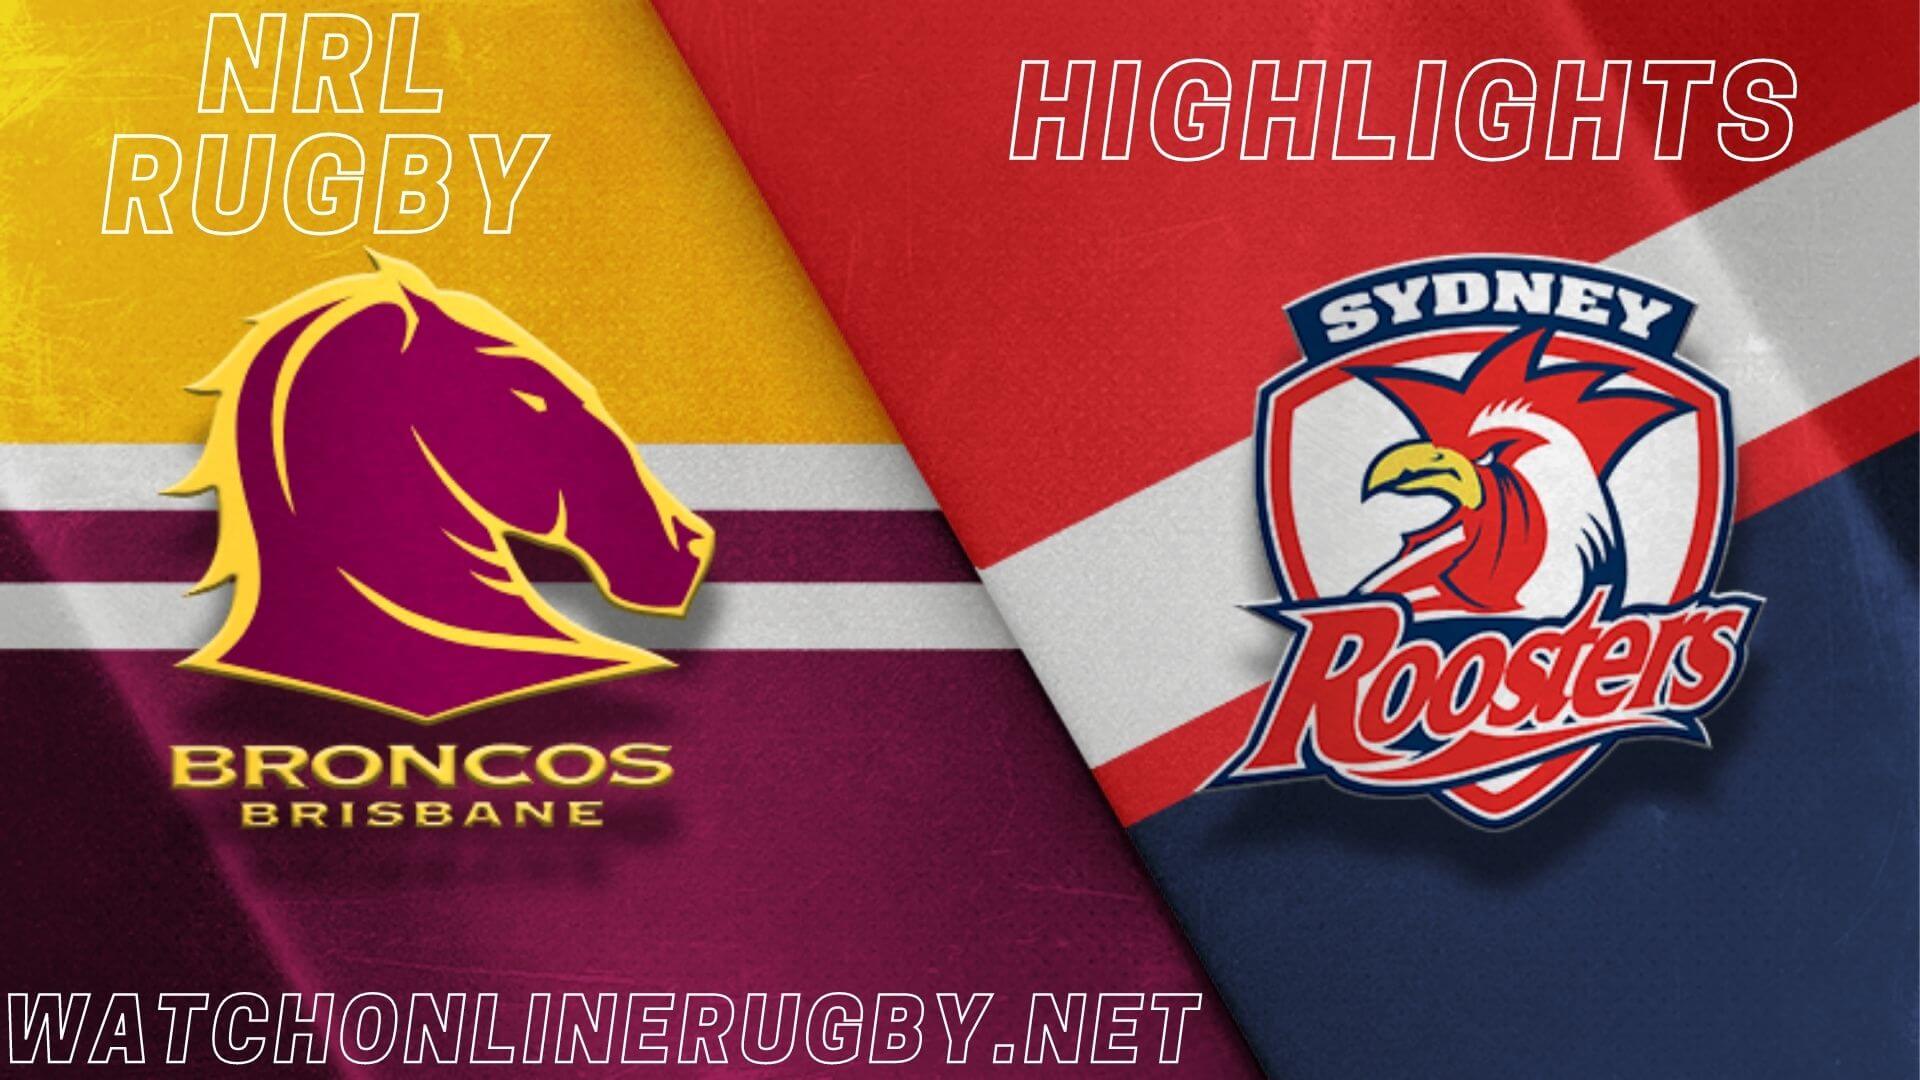 Broncos Vs Roosters Highlights RD 5 NRL Rugby